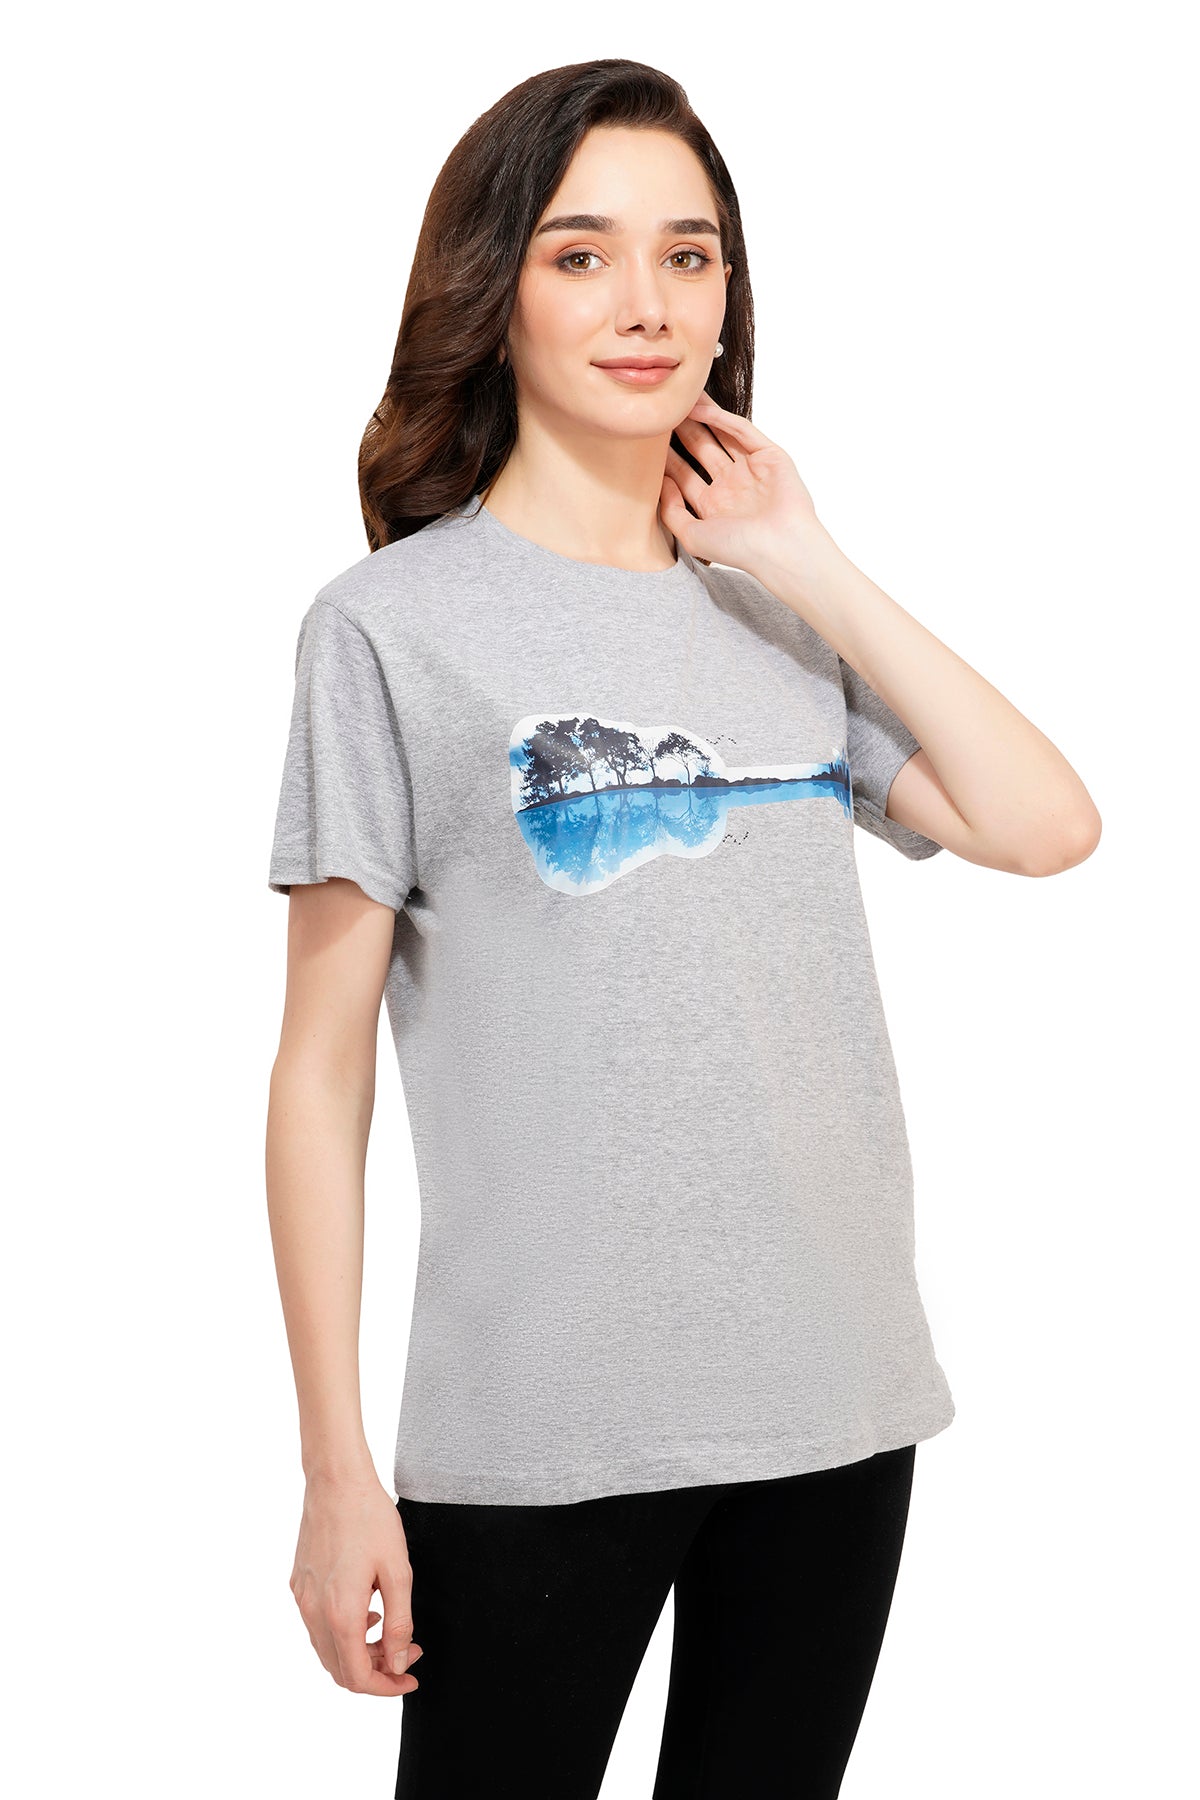 Women Heather Grey Guitar refection – t-shirt Lake SNAZZYNSUAVE